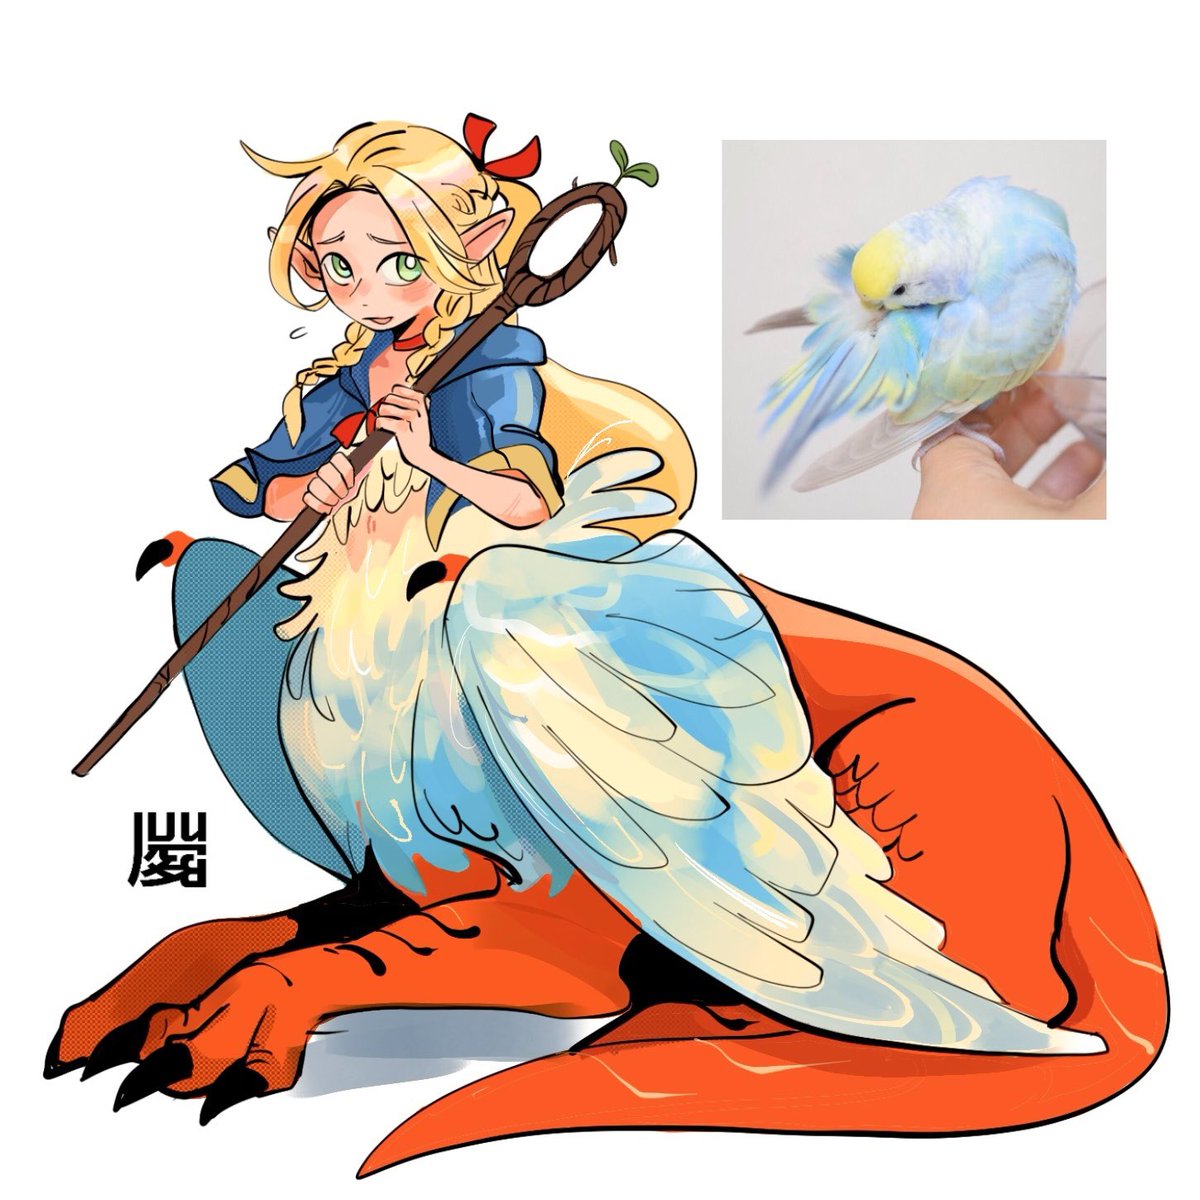 Marcille as a lovebird-chimera, bless me.🦋😇
#dungeonmeshi